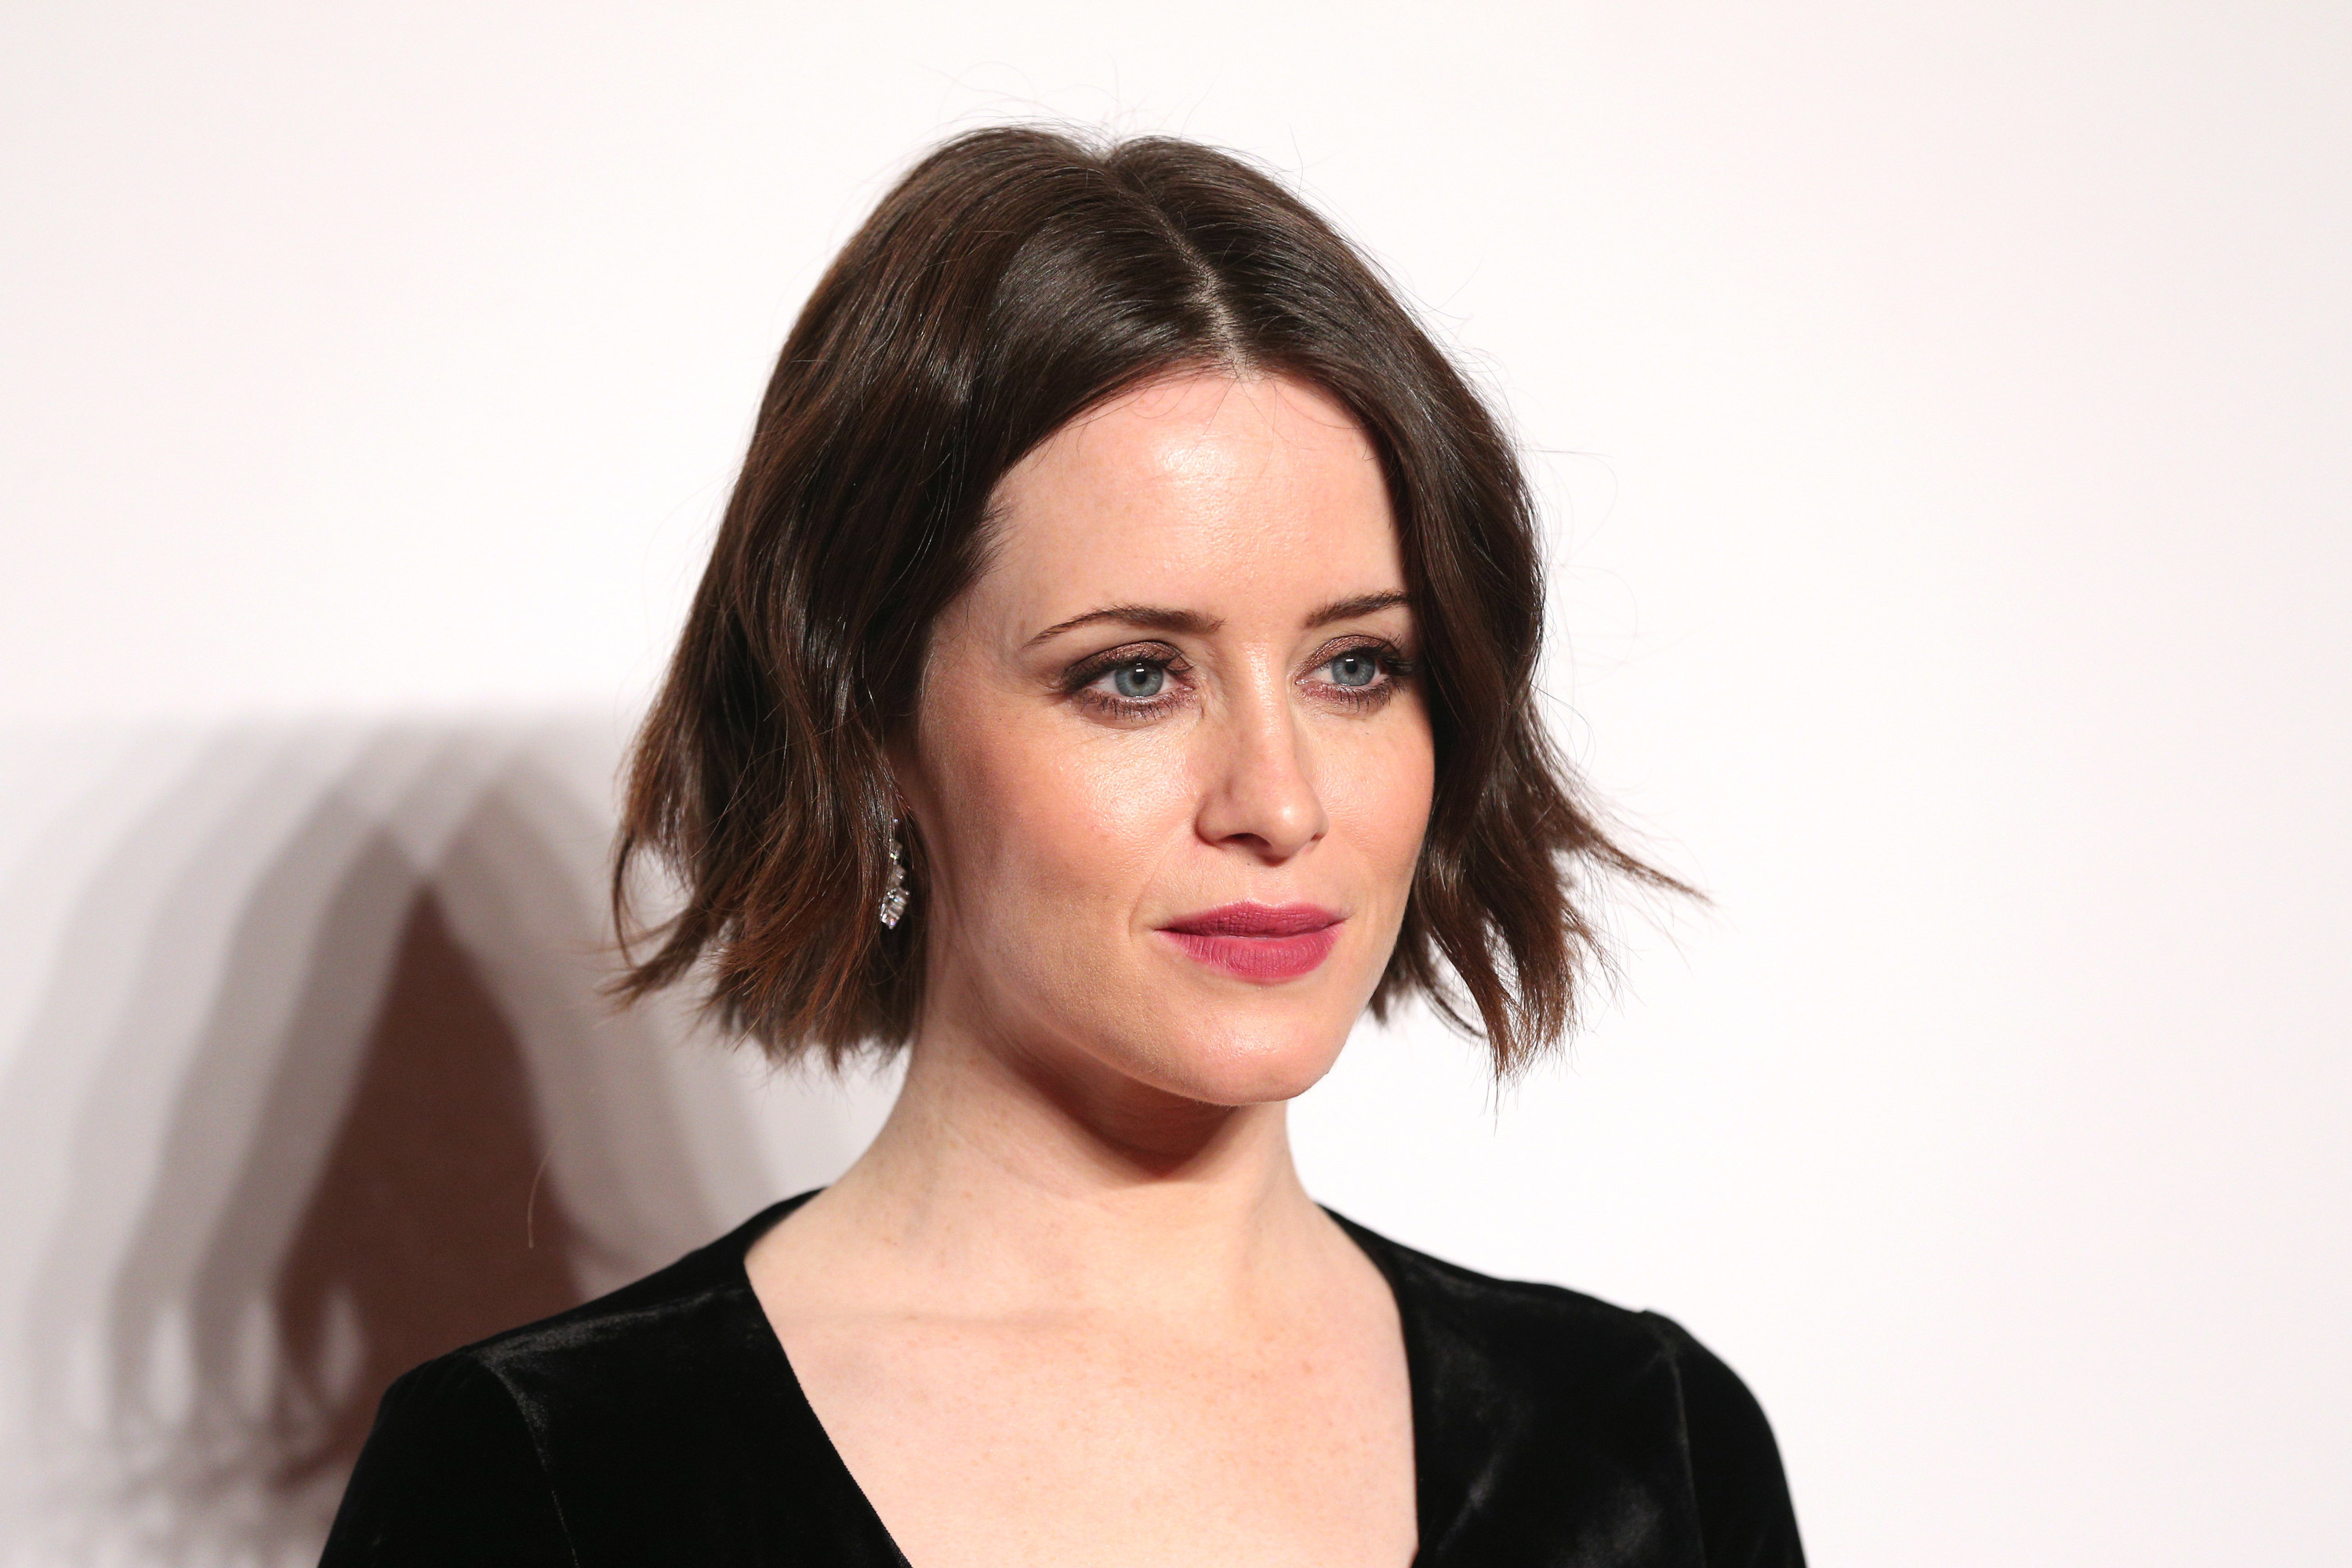 Lily Cartier Sex Video - Claire Foy On Why Sex Scenes Can Feel Exploitative